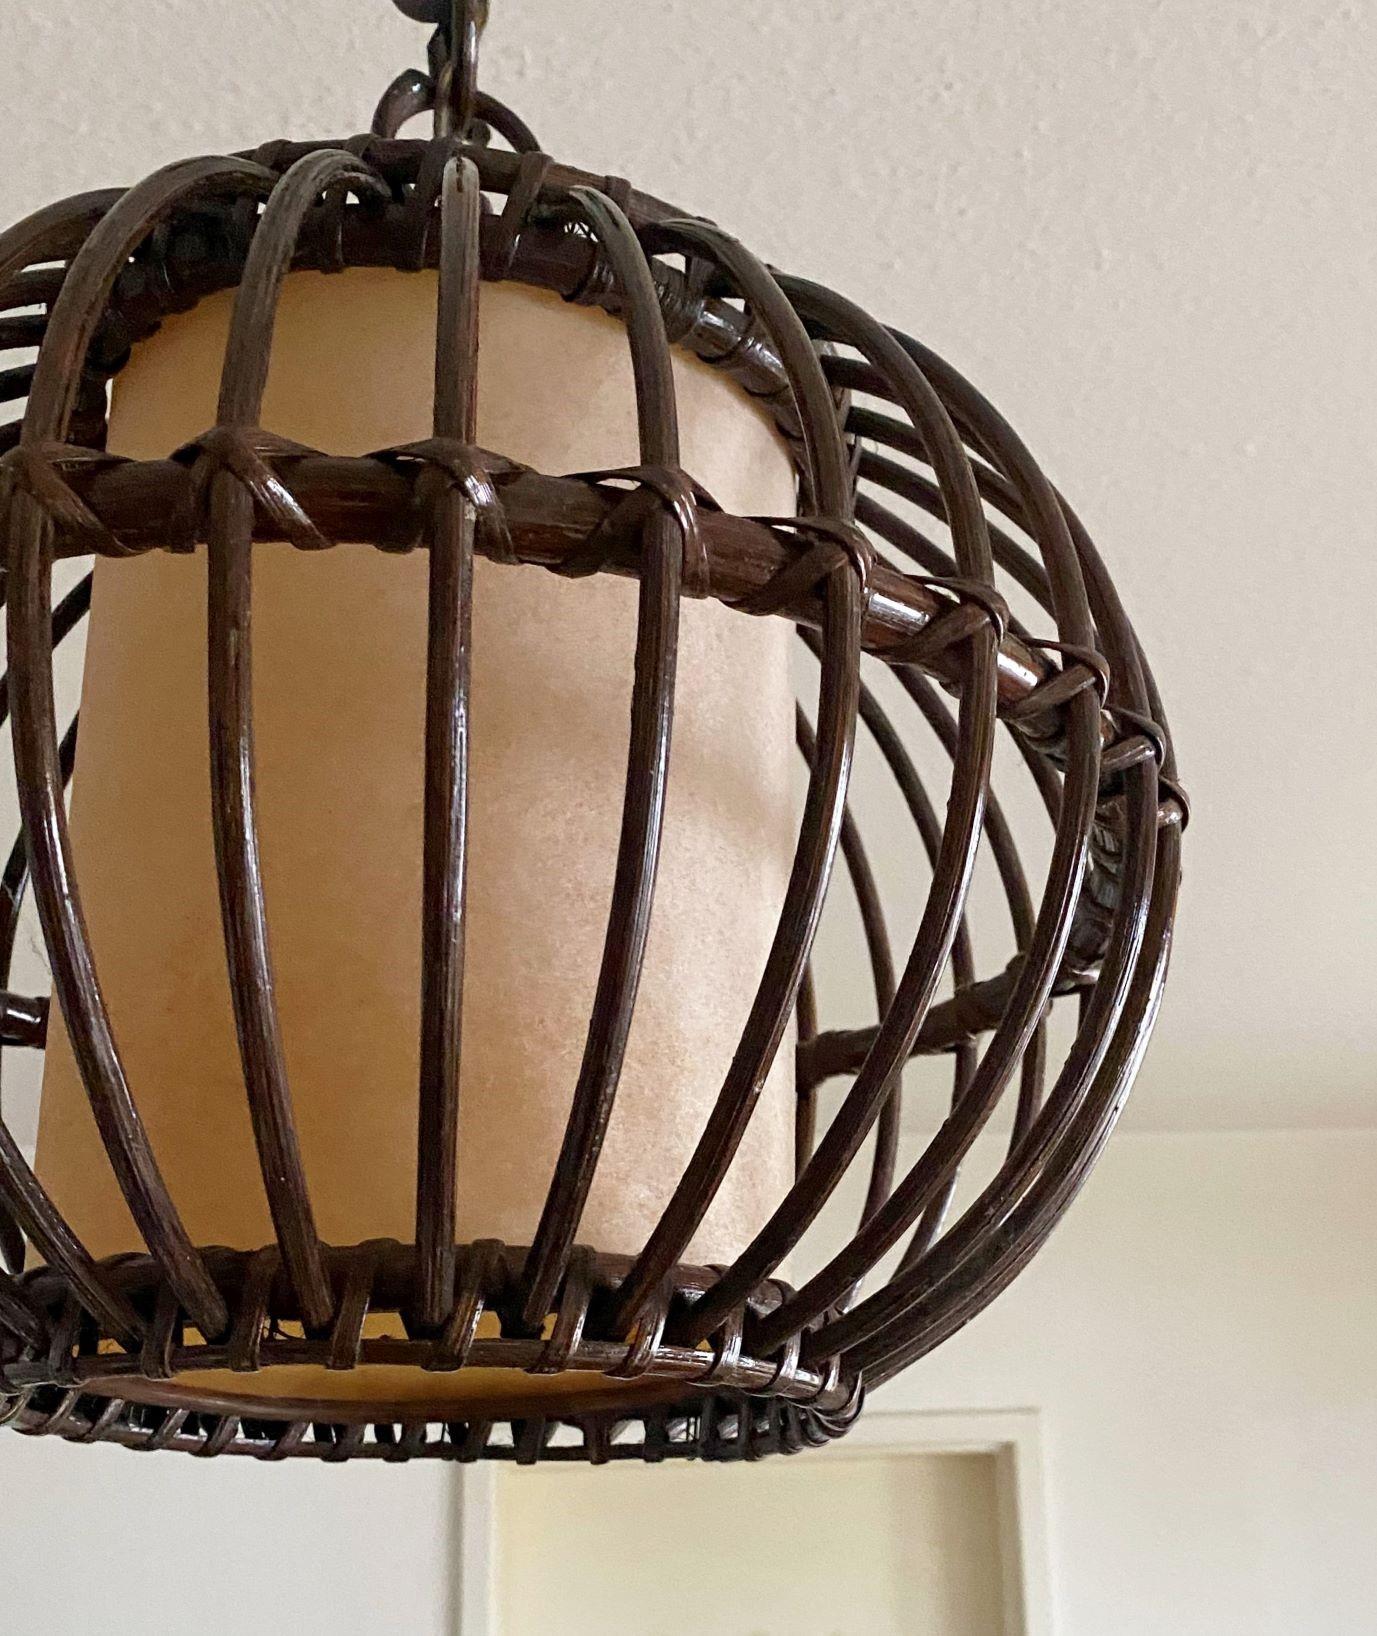 20th Century Handcrafted Rattan Wicker Globe Pendant with Perchament Lamp Shade, Spain, 1950s For Sale